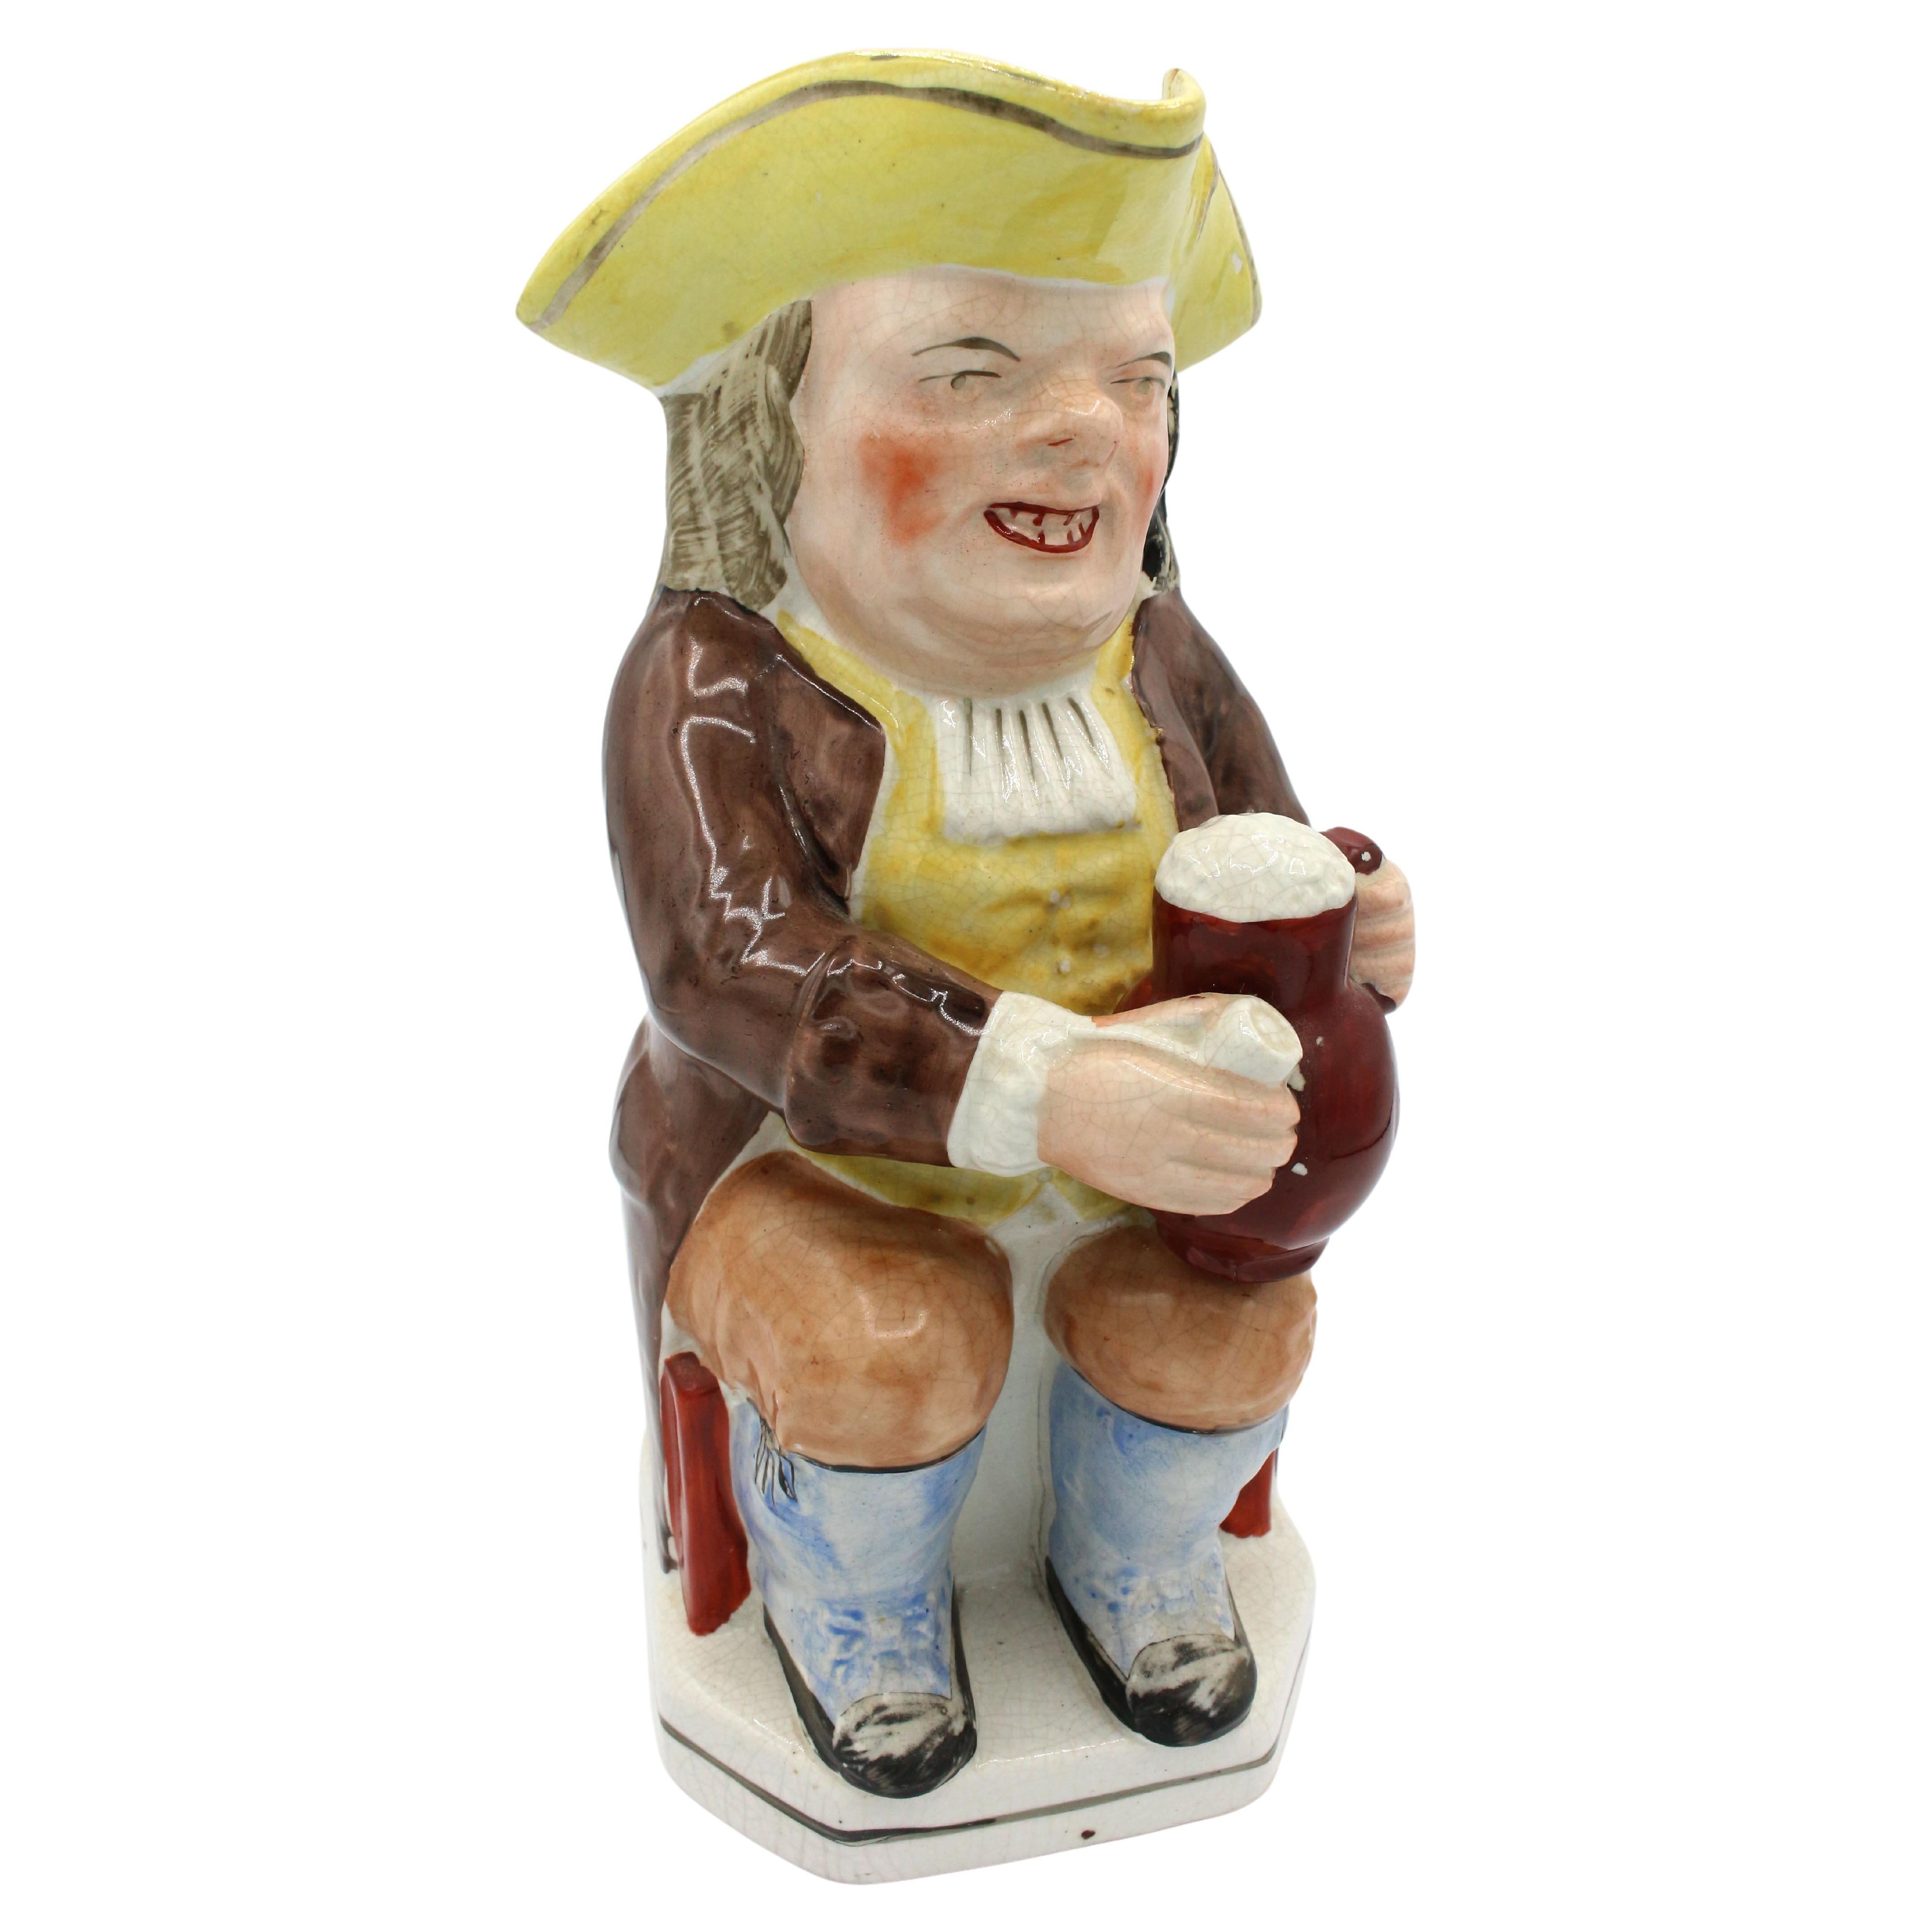 The Drunken Parson with White Clerical Collar Toby Jug, Angleterre, vers 1880